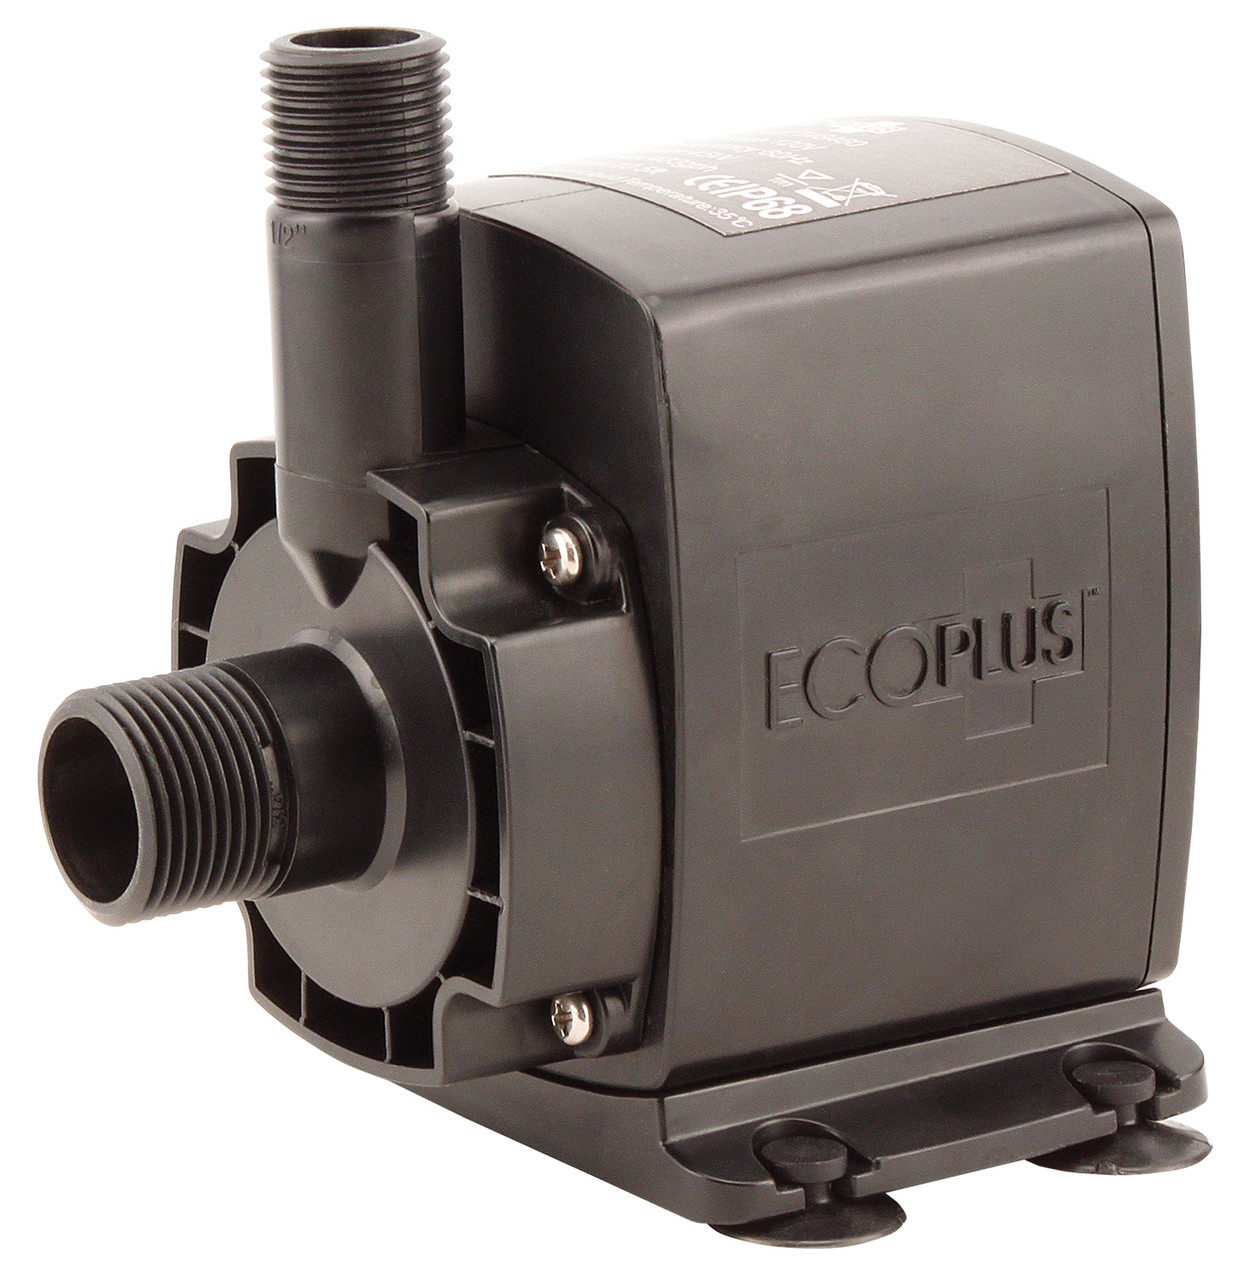 EcoPlus Mag Drive 350 Utility Pump - Submersible or Inline